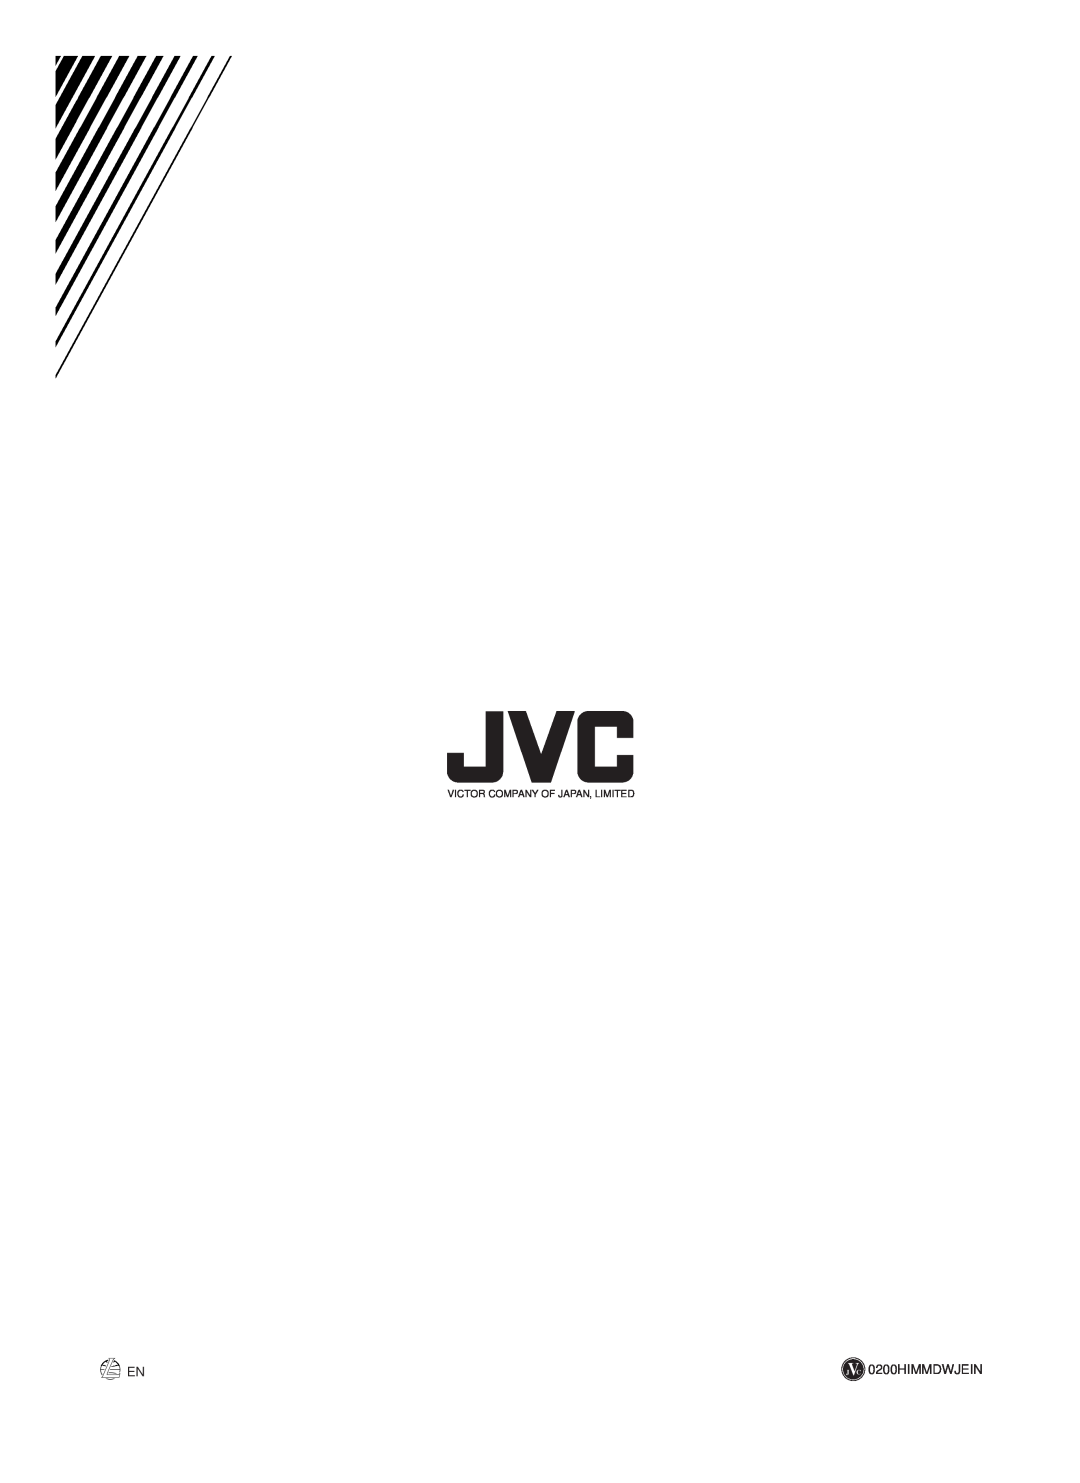 JVC RX-9000VBK manual 0200HIMMDWJEIN, Victor Company Of Japan, Limited 